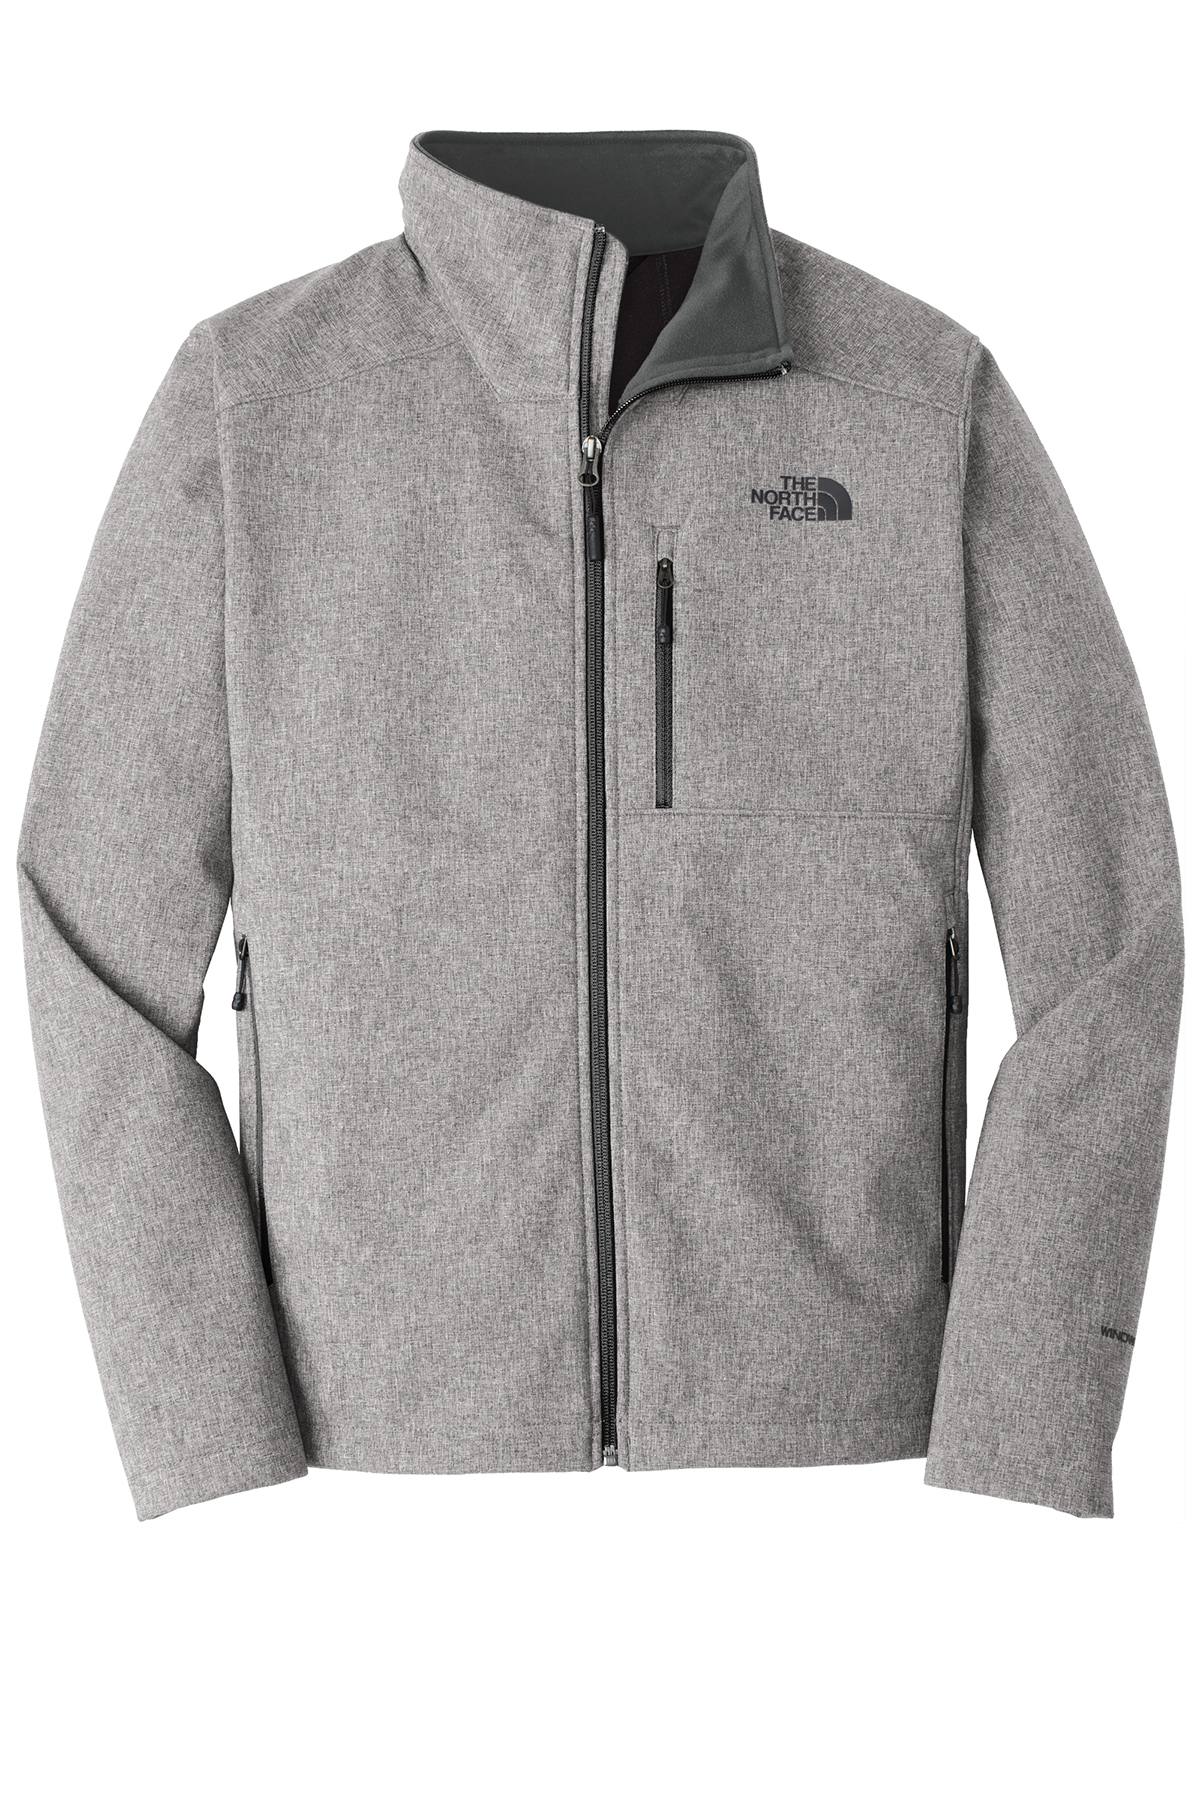 The North Face<SUP>®</SUP> Apex Barrier Soft Shell Jacket